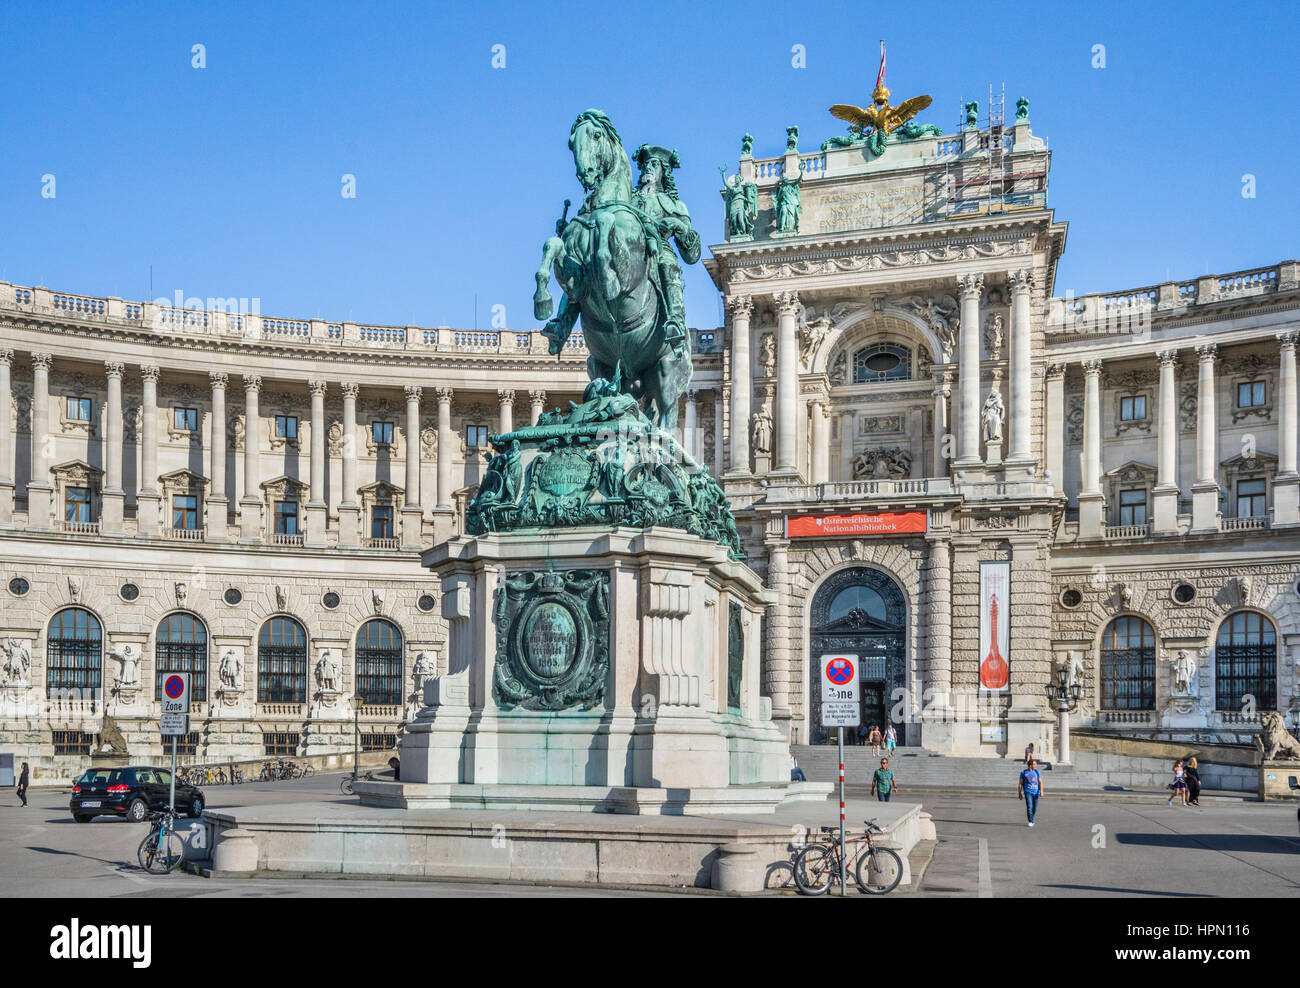 Austria, Vienna, Hofburg Palace, Heldenplatz (Heroes' Square) with equestrian statue of Prince Eugene of Savoy Stock Photo